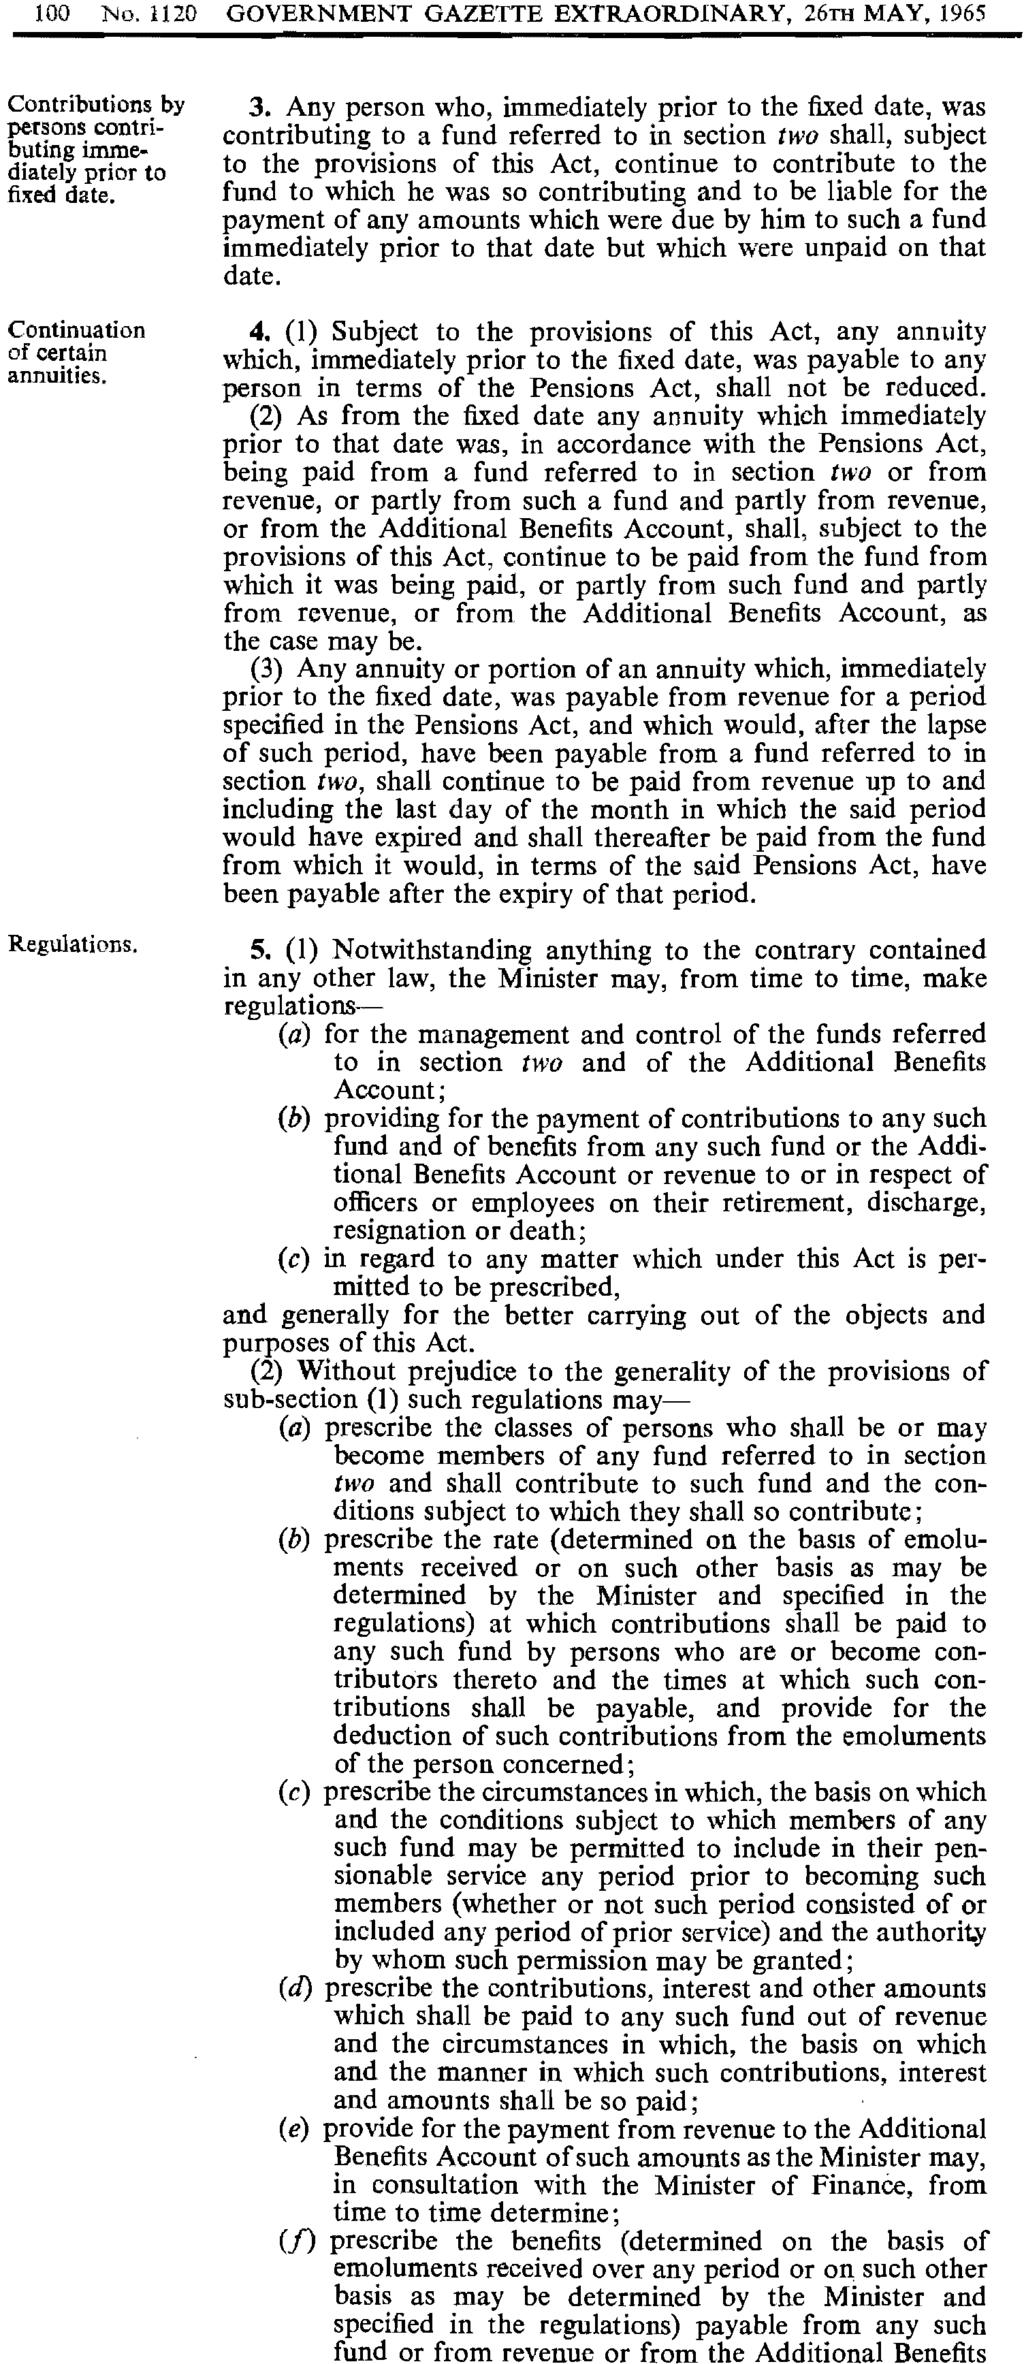 100 No.1120 GOVERNMENT GAZETTE EXTRAORDINARY, 26m MAY, 1965 Contributions by persons contributing immediately prior to fixed date. Continuation of certain annuities. Regulations. 3.